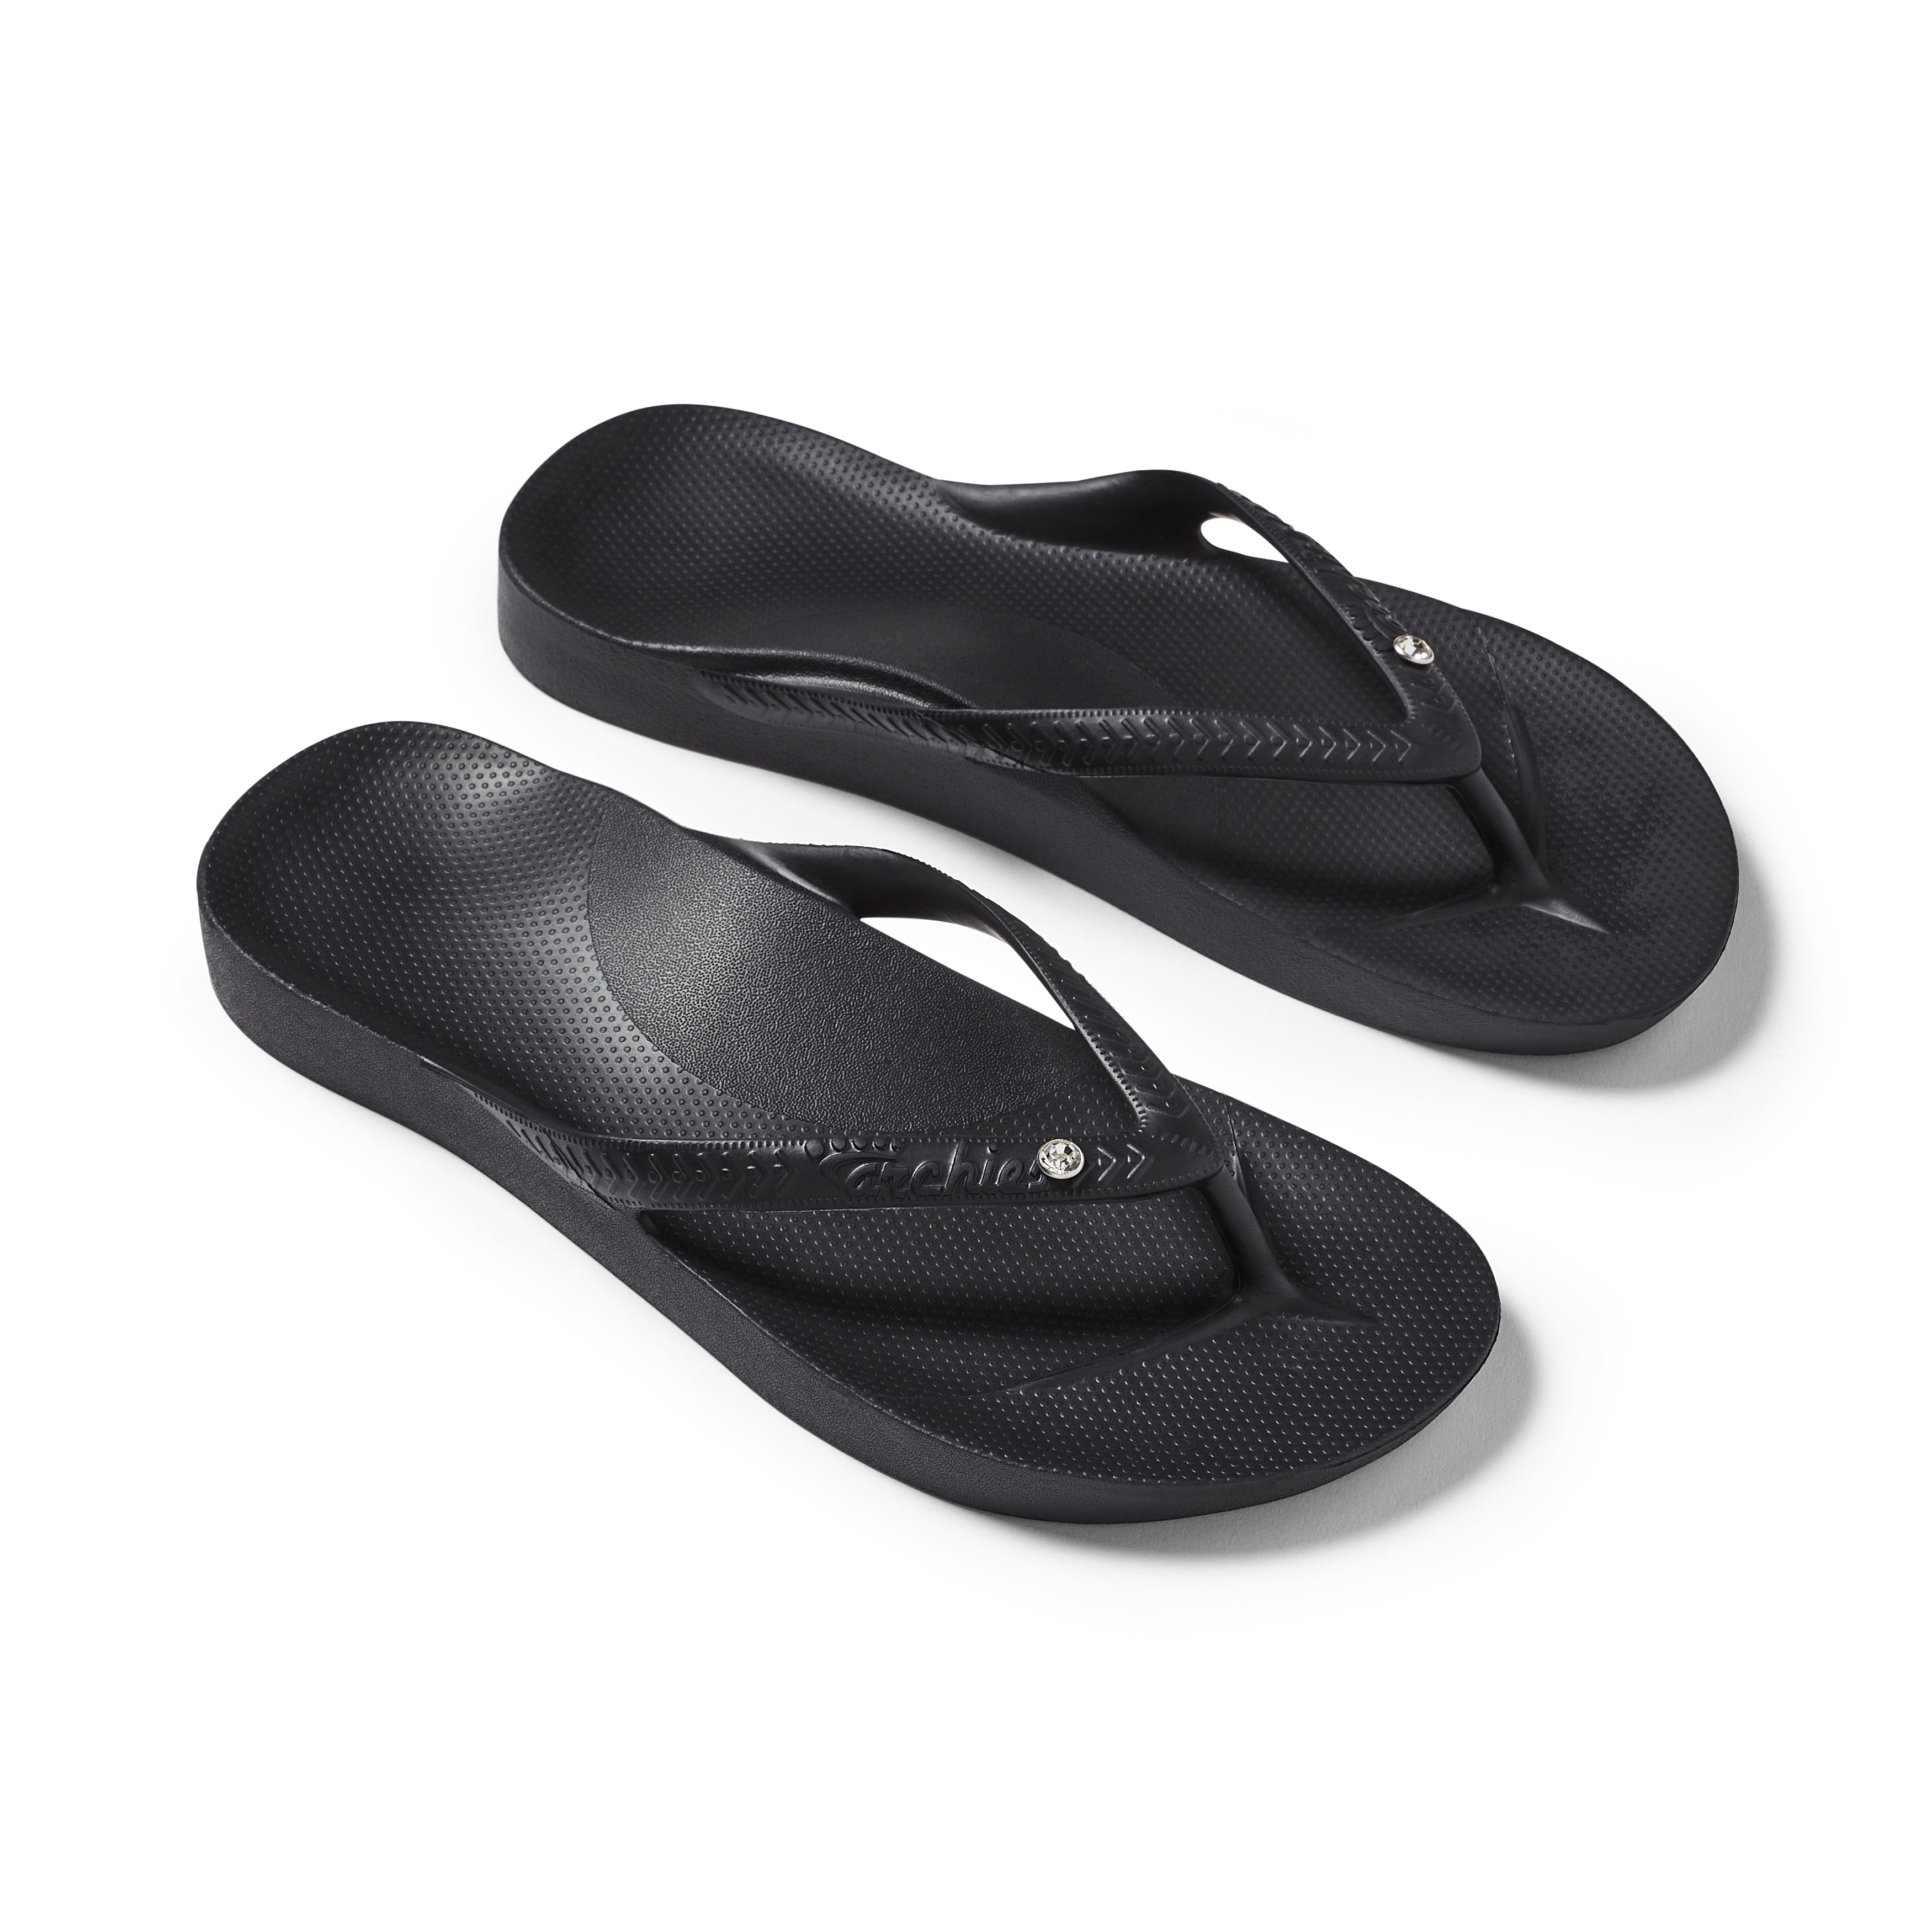 ARCHIES Footwear - Flip Flop Sandals – Offering Great Arch Support and  Comfort - Black (Women's US 5/Men's US 4)